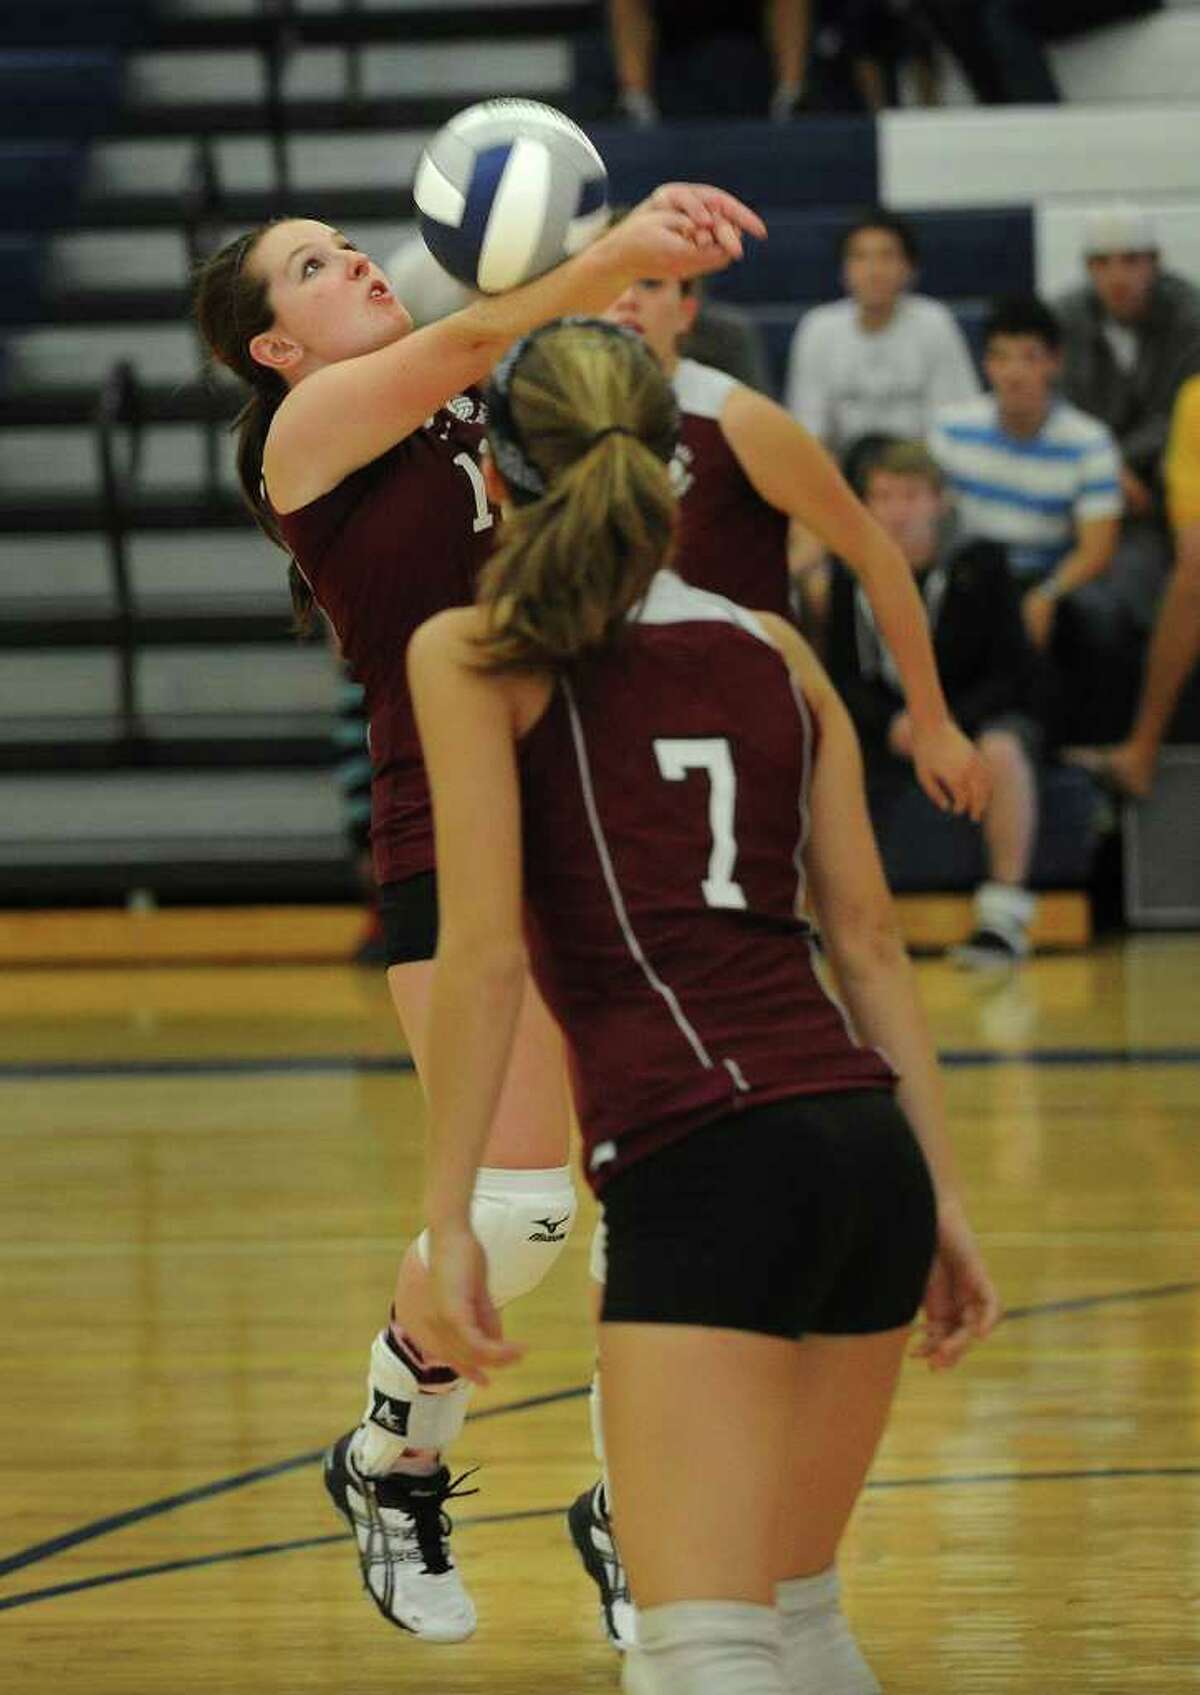 Bethel's Emily DeFazio plays the ball with her back to the net during their match at Weston High School on Monday, September 19, 2011.